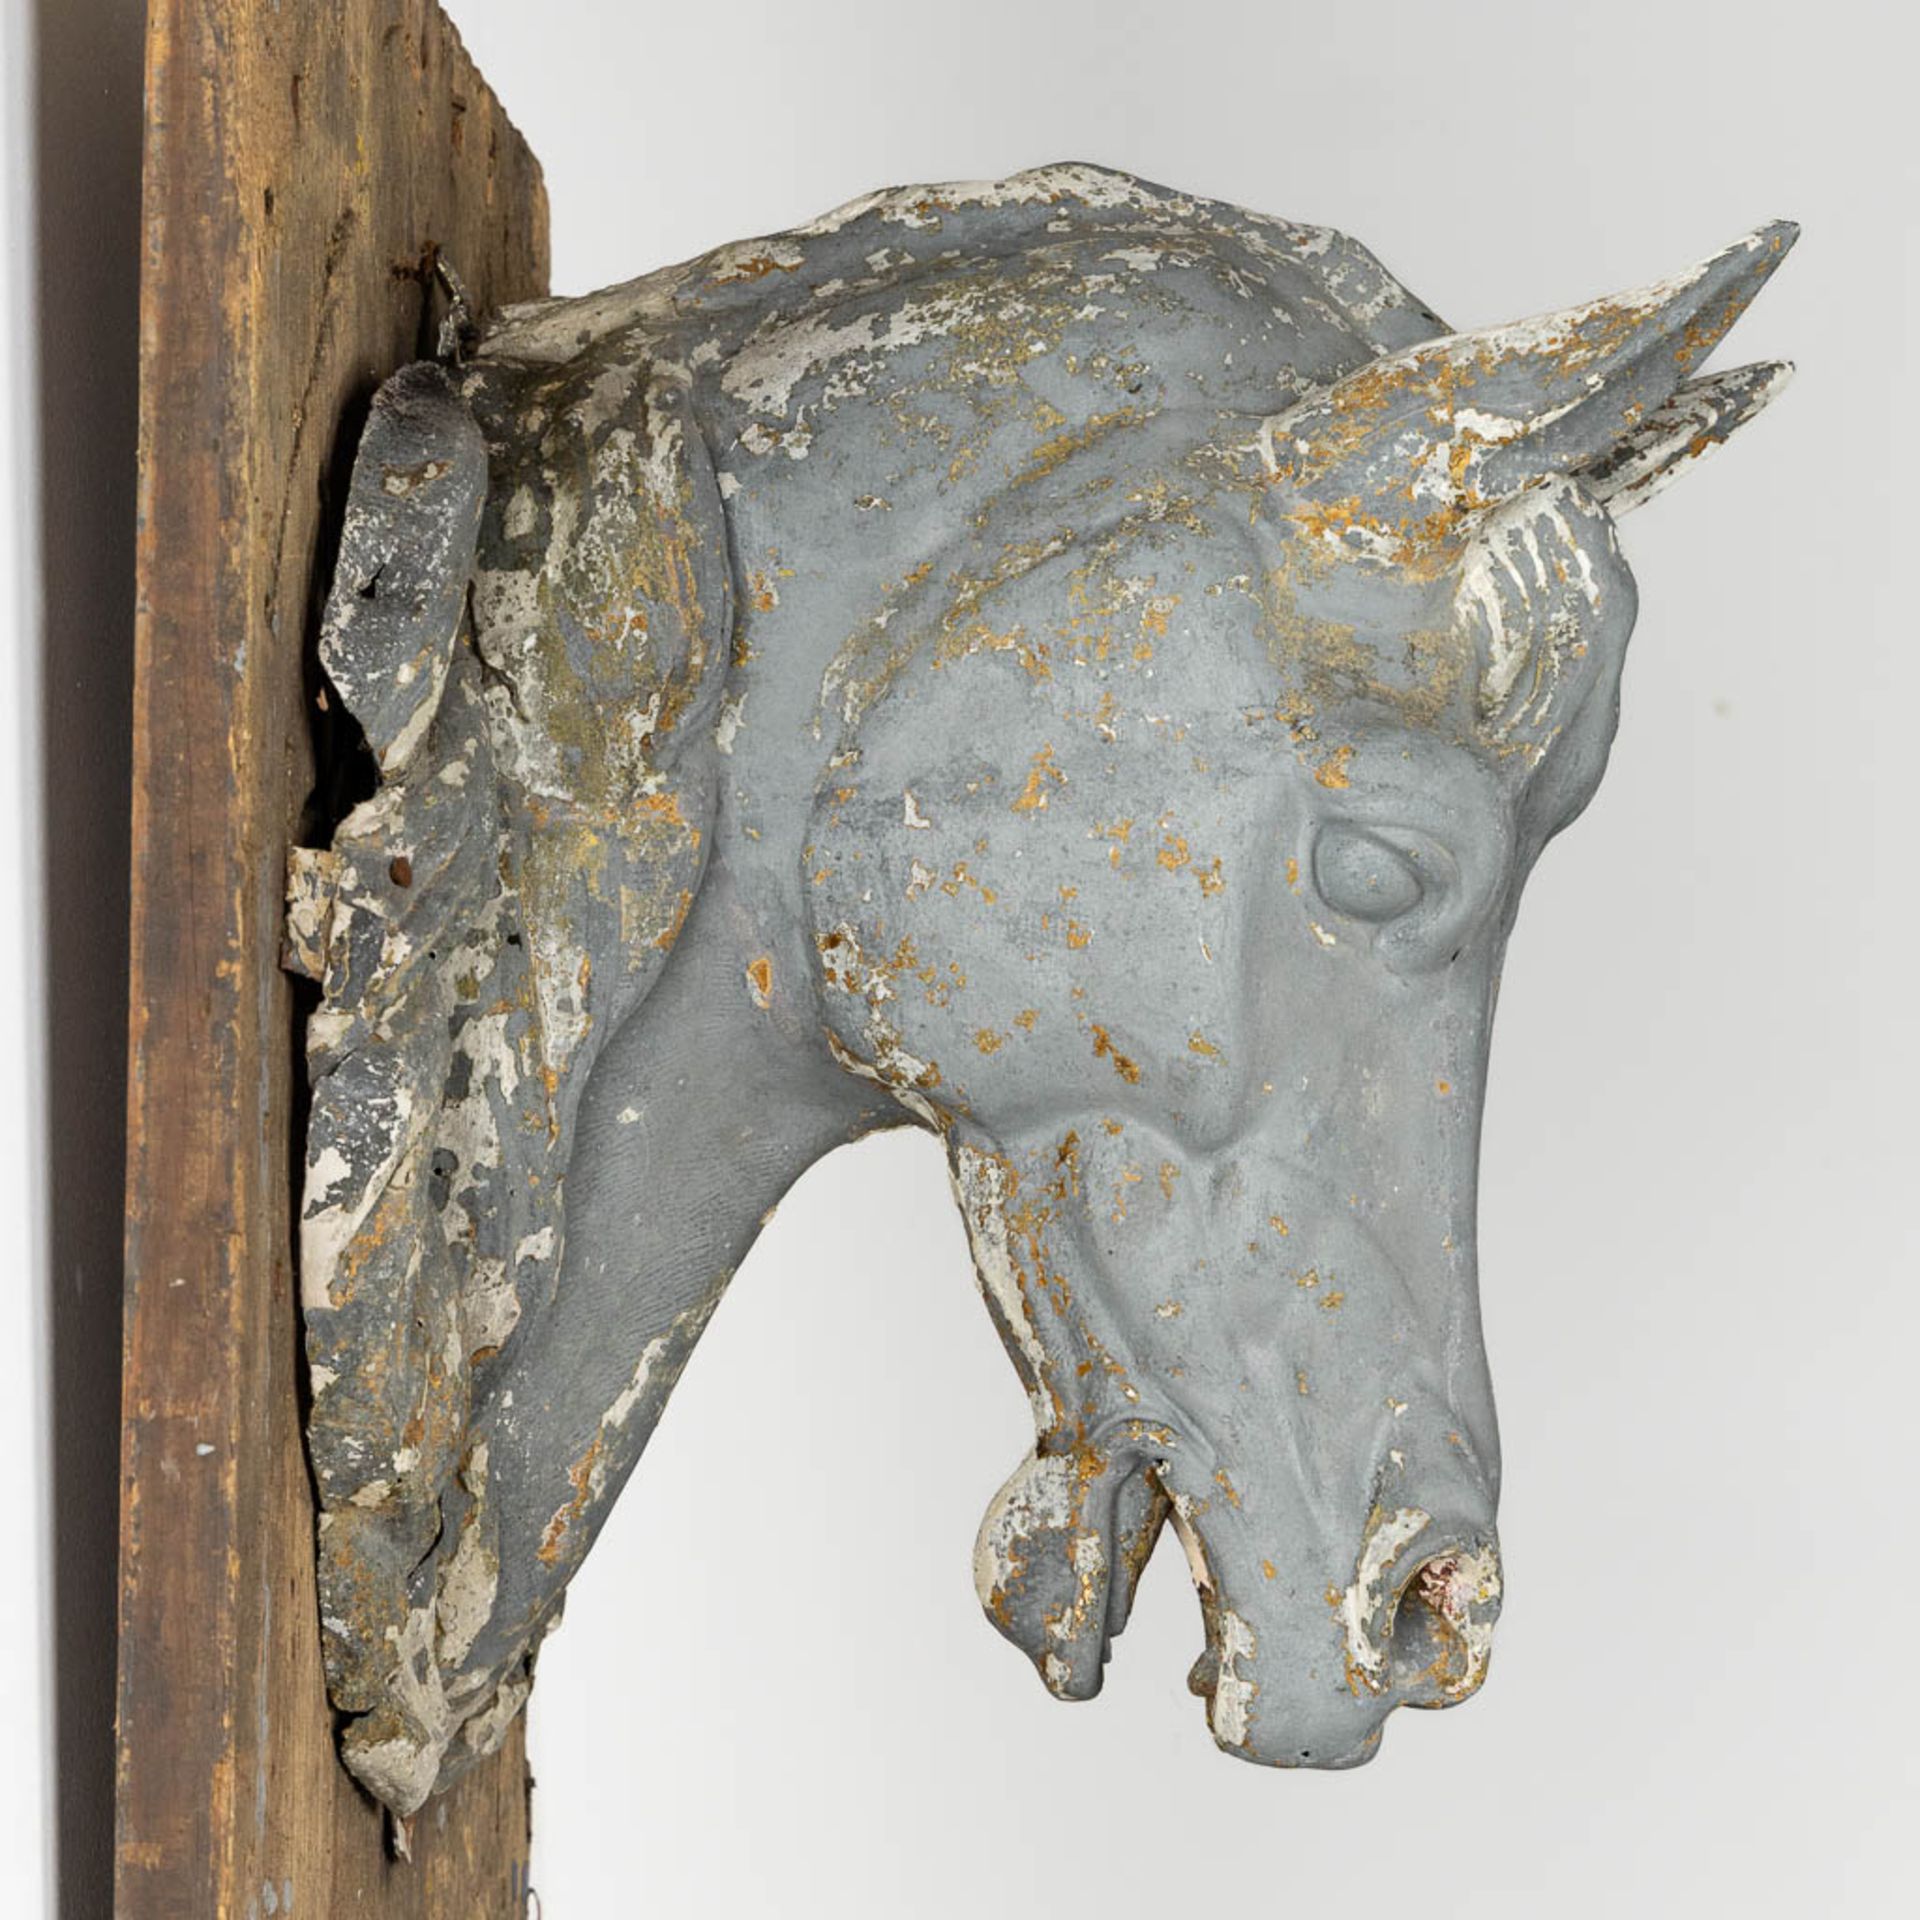 An antique zinc Horse Head, mounted on a wood board. Circa 1920. (L:40 x W:39 x H:44 cm) - Image 11 of 13